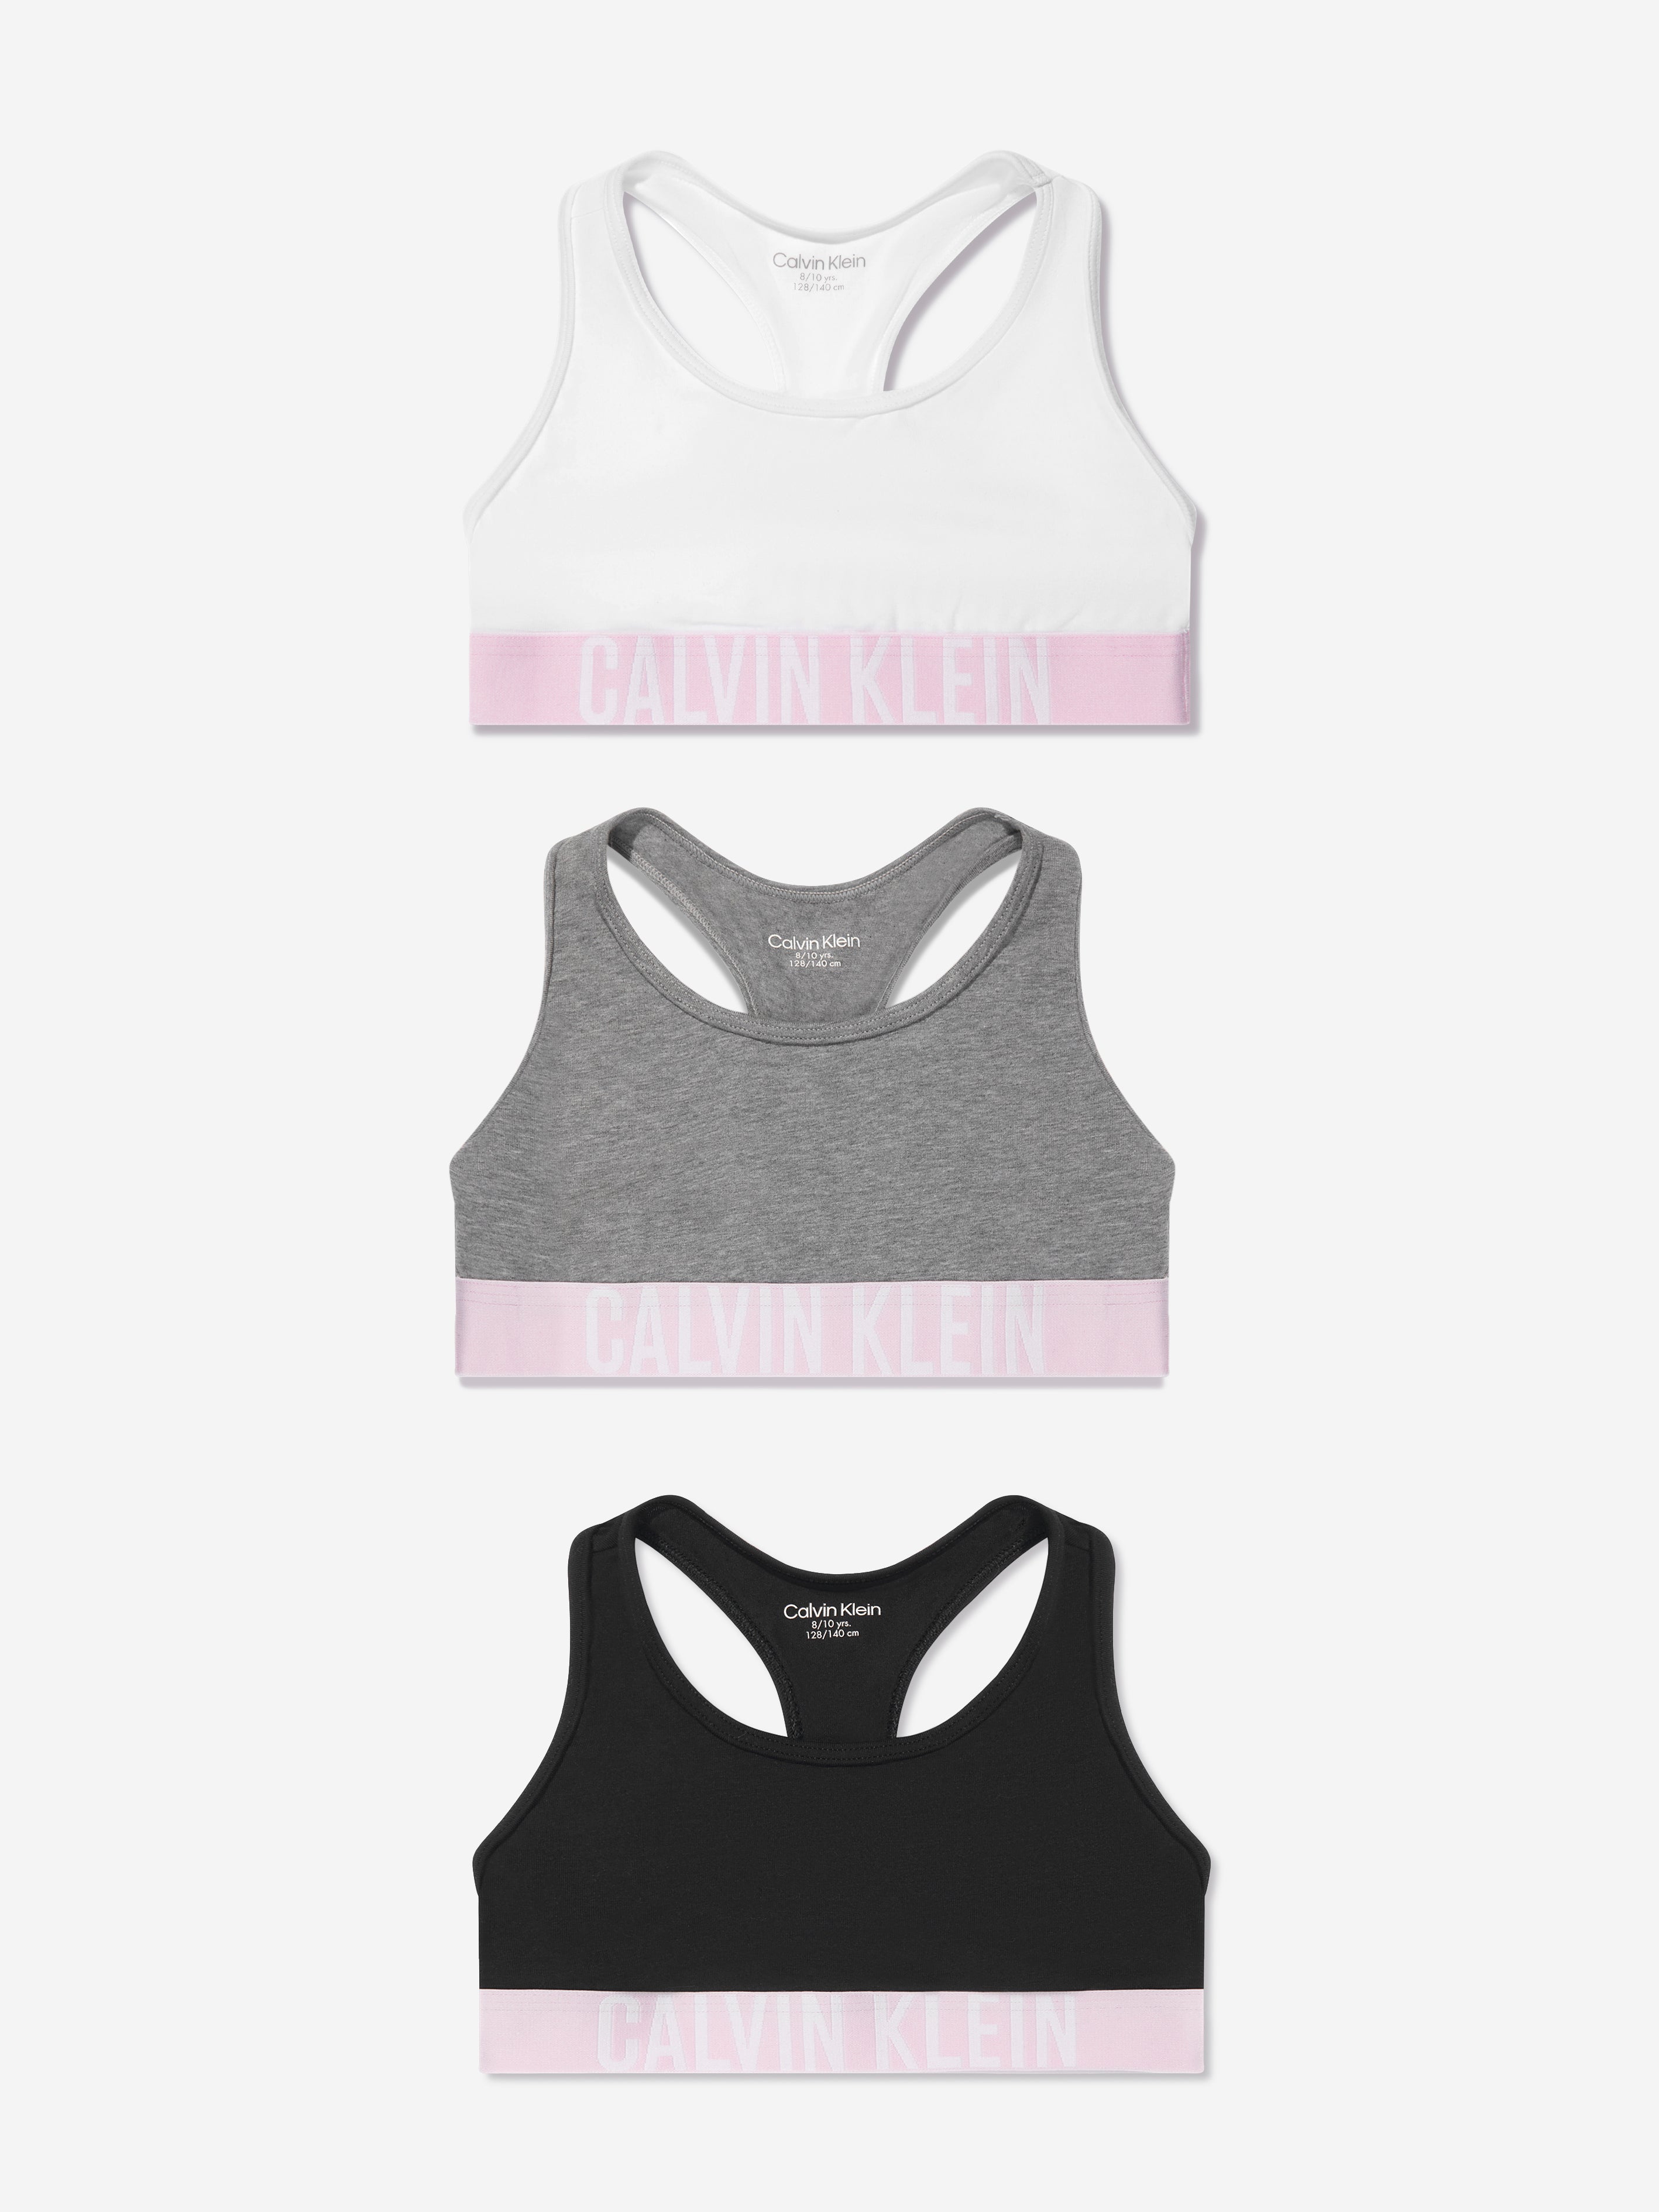  Calvin Klein Girls Seamless Bralette 3 Pack, Heather  Grey/Black/White, S: Clothing, Shoes & Jewelry